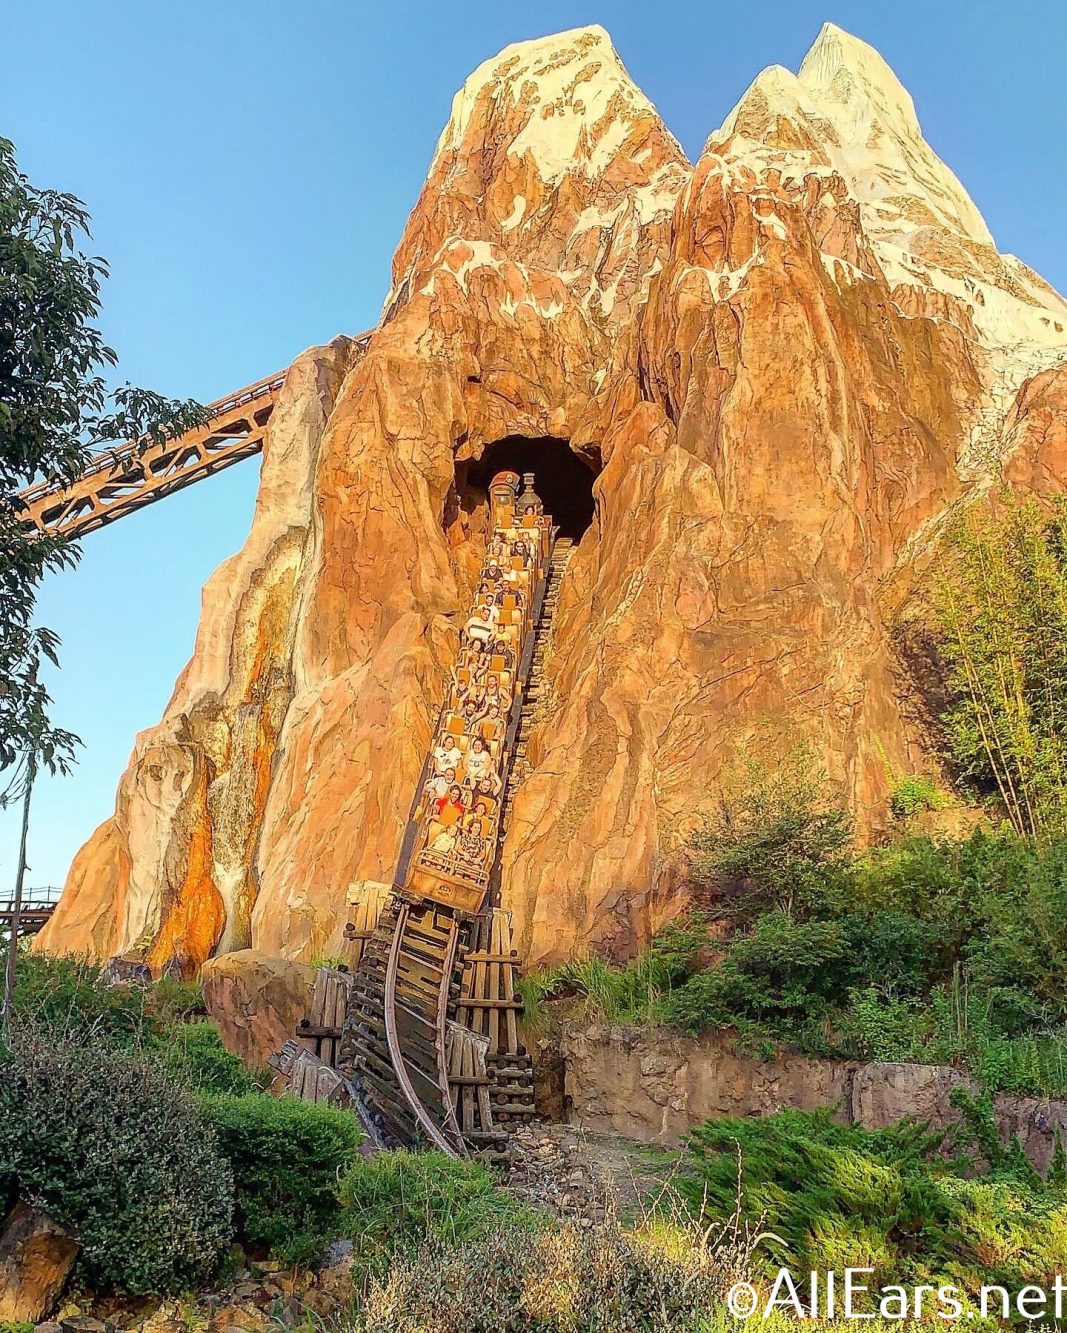 7 Fun Facts About Animal Kingdom's Expedition Everest At Disney World